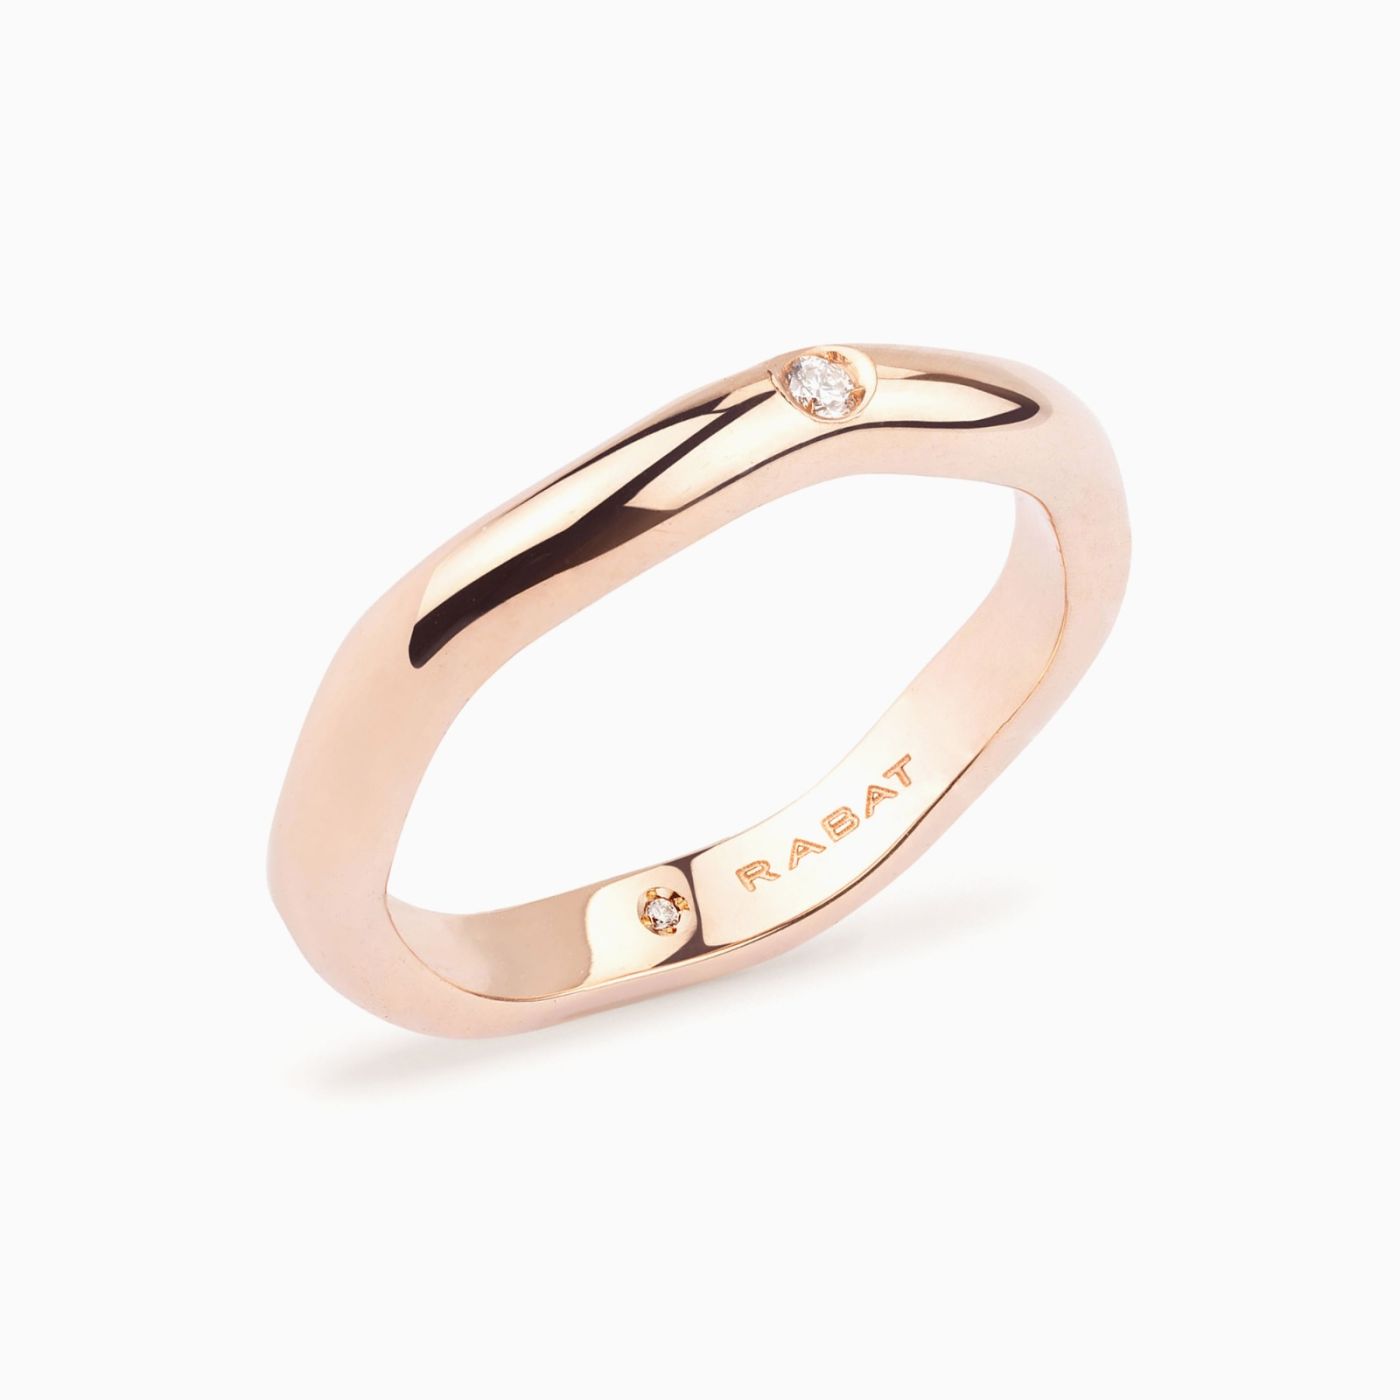 Rose wedding band in gold with external diamond